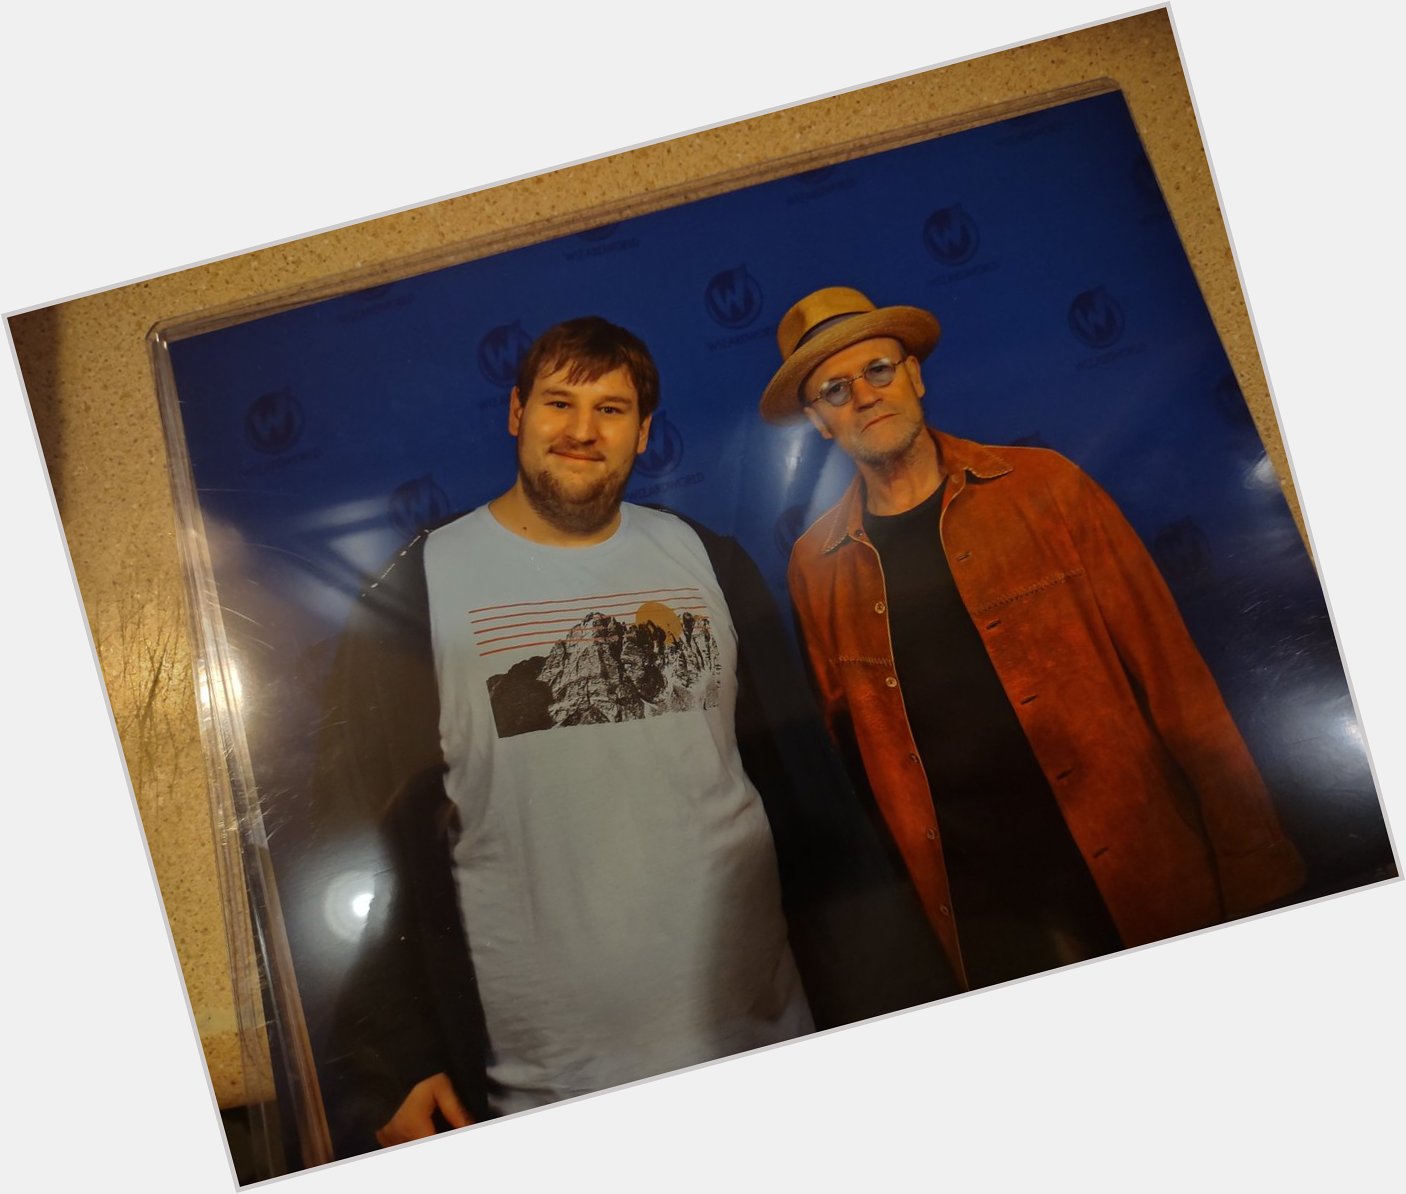 Happy birthday Michael Rooker. Glad I got a picture with you on my birthday. 